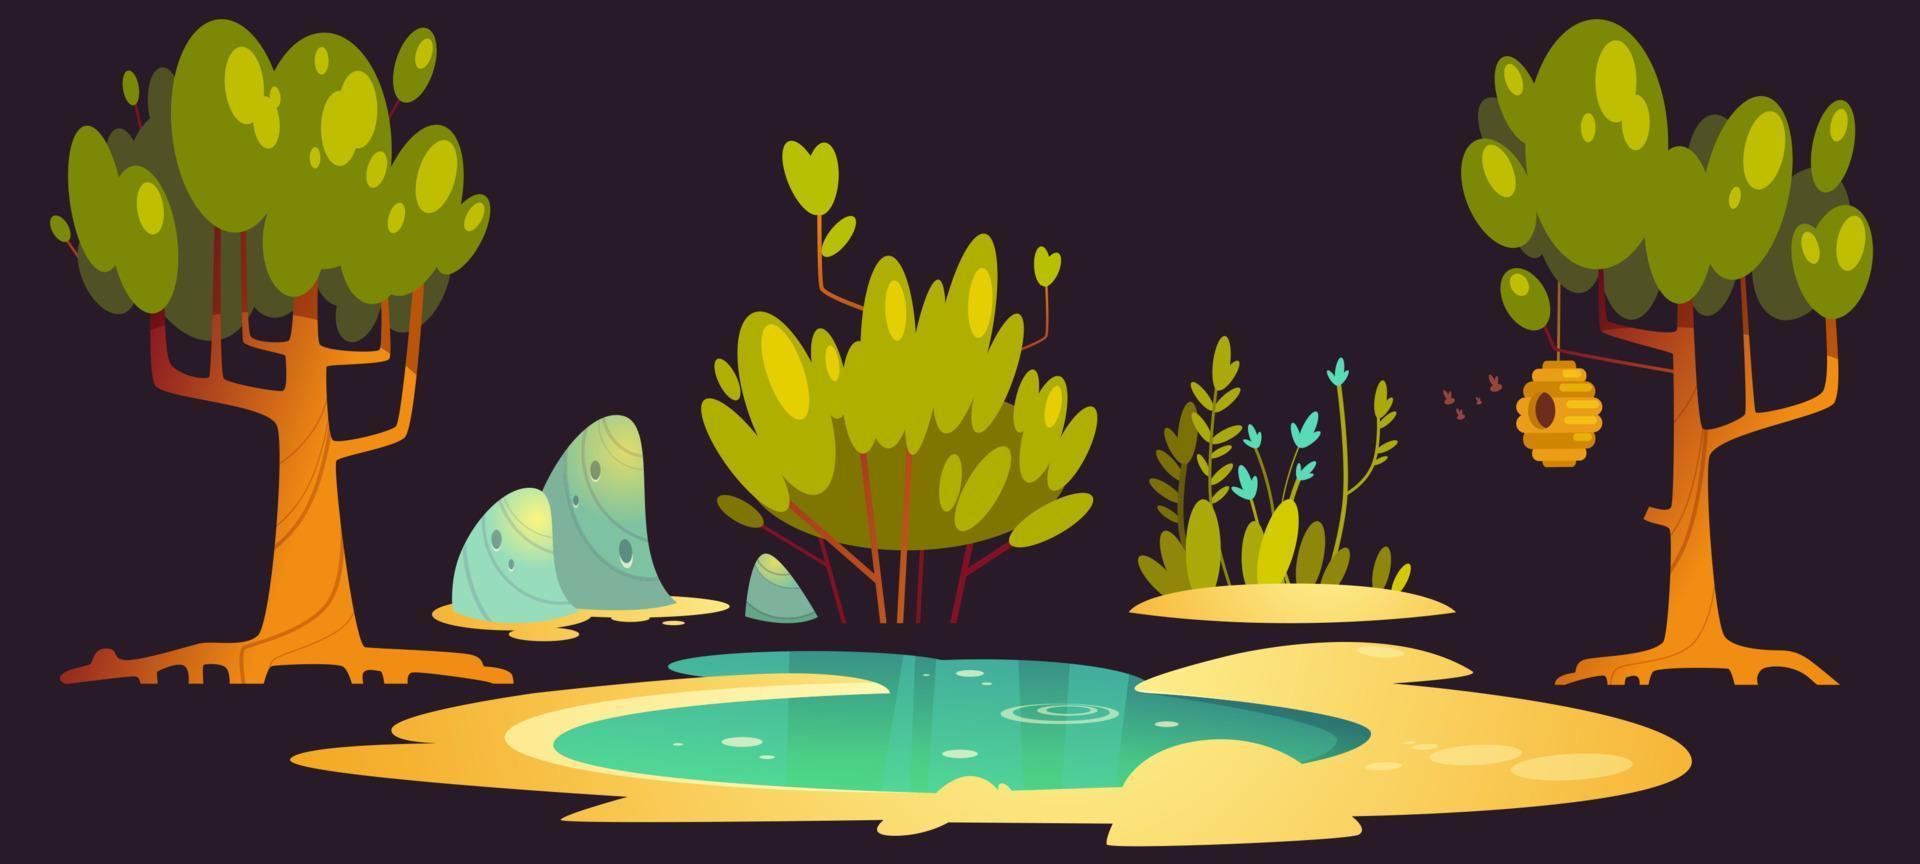 Forest with trees, pond, stones and beehive vector